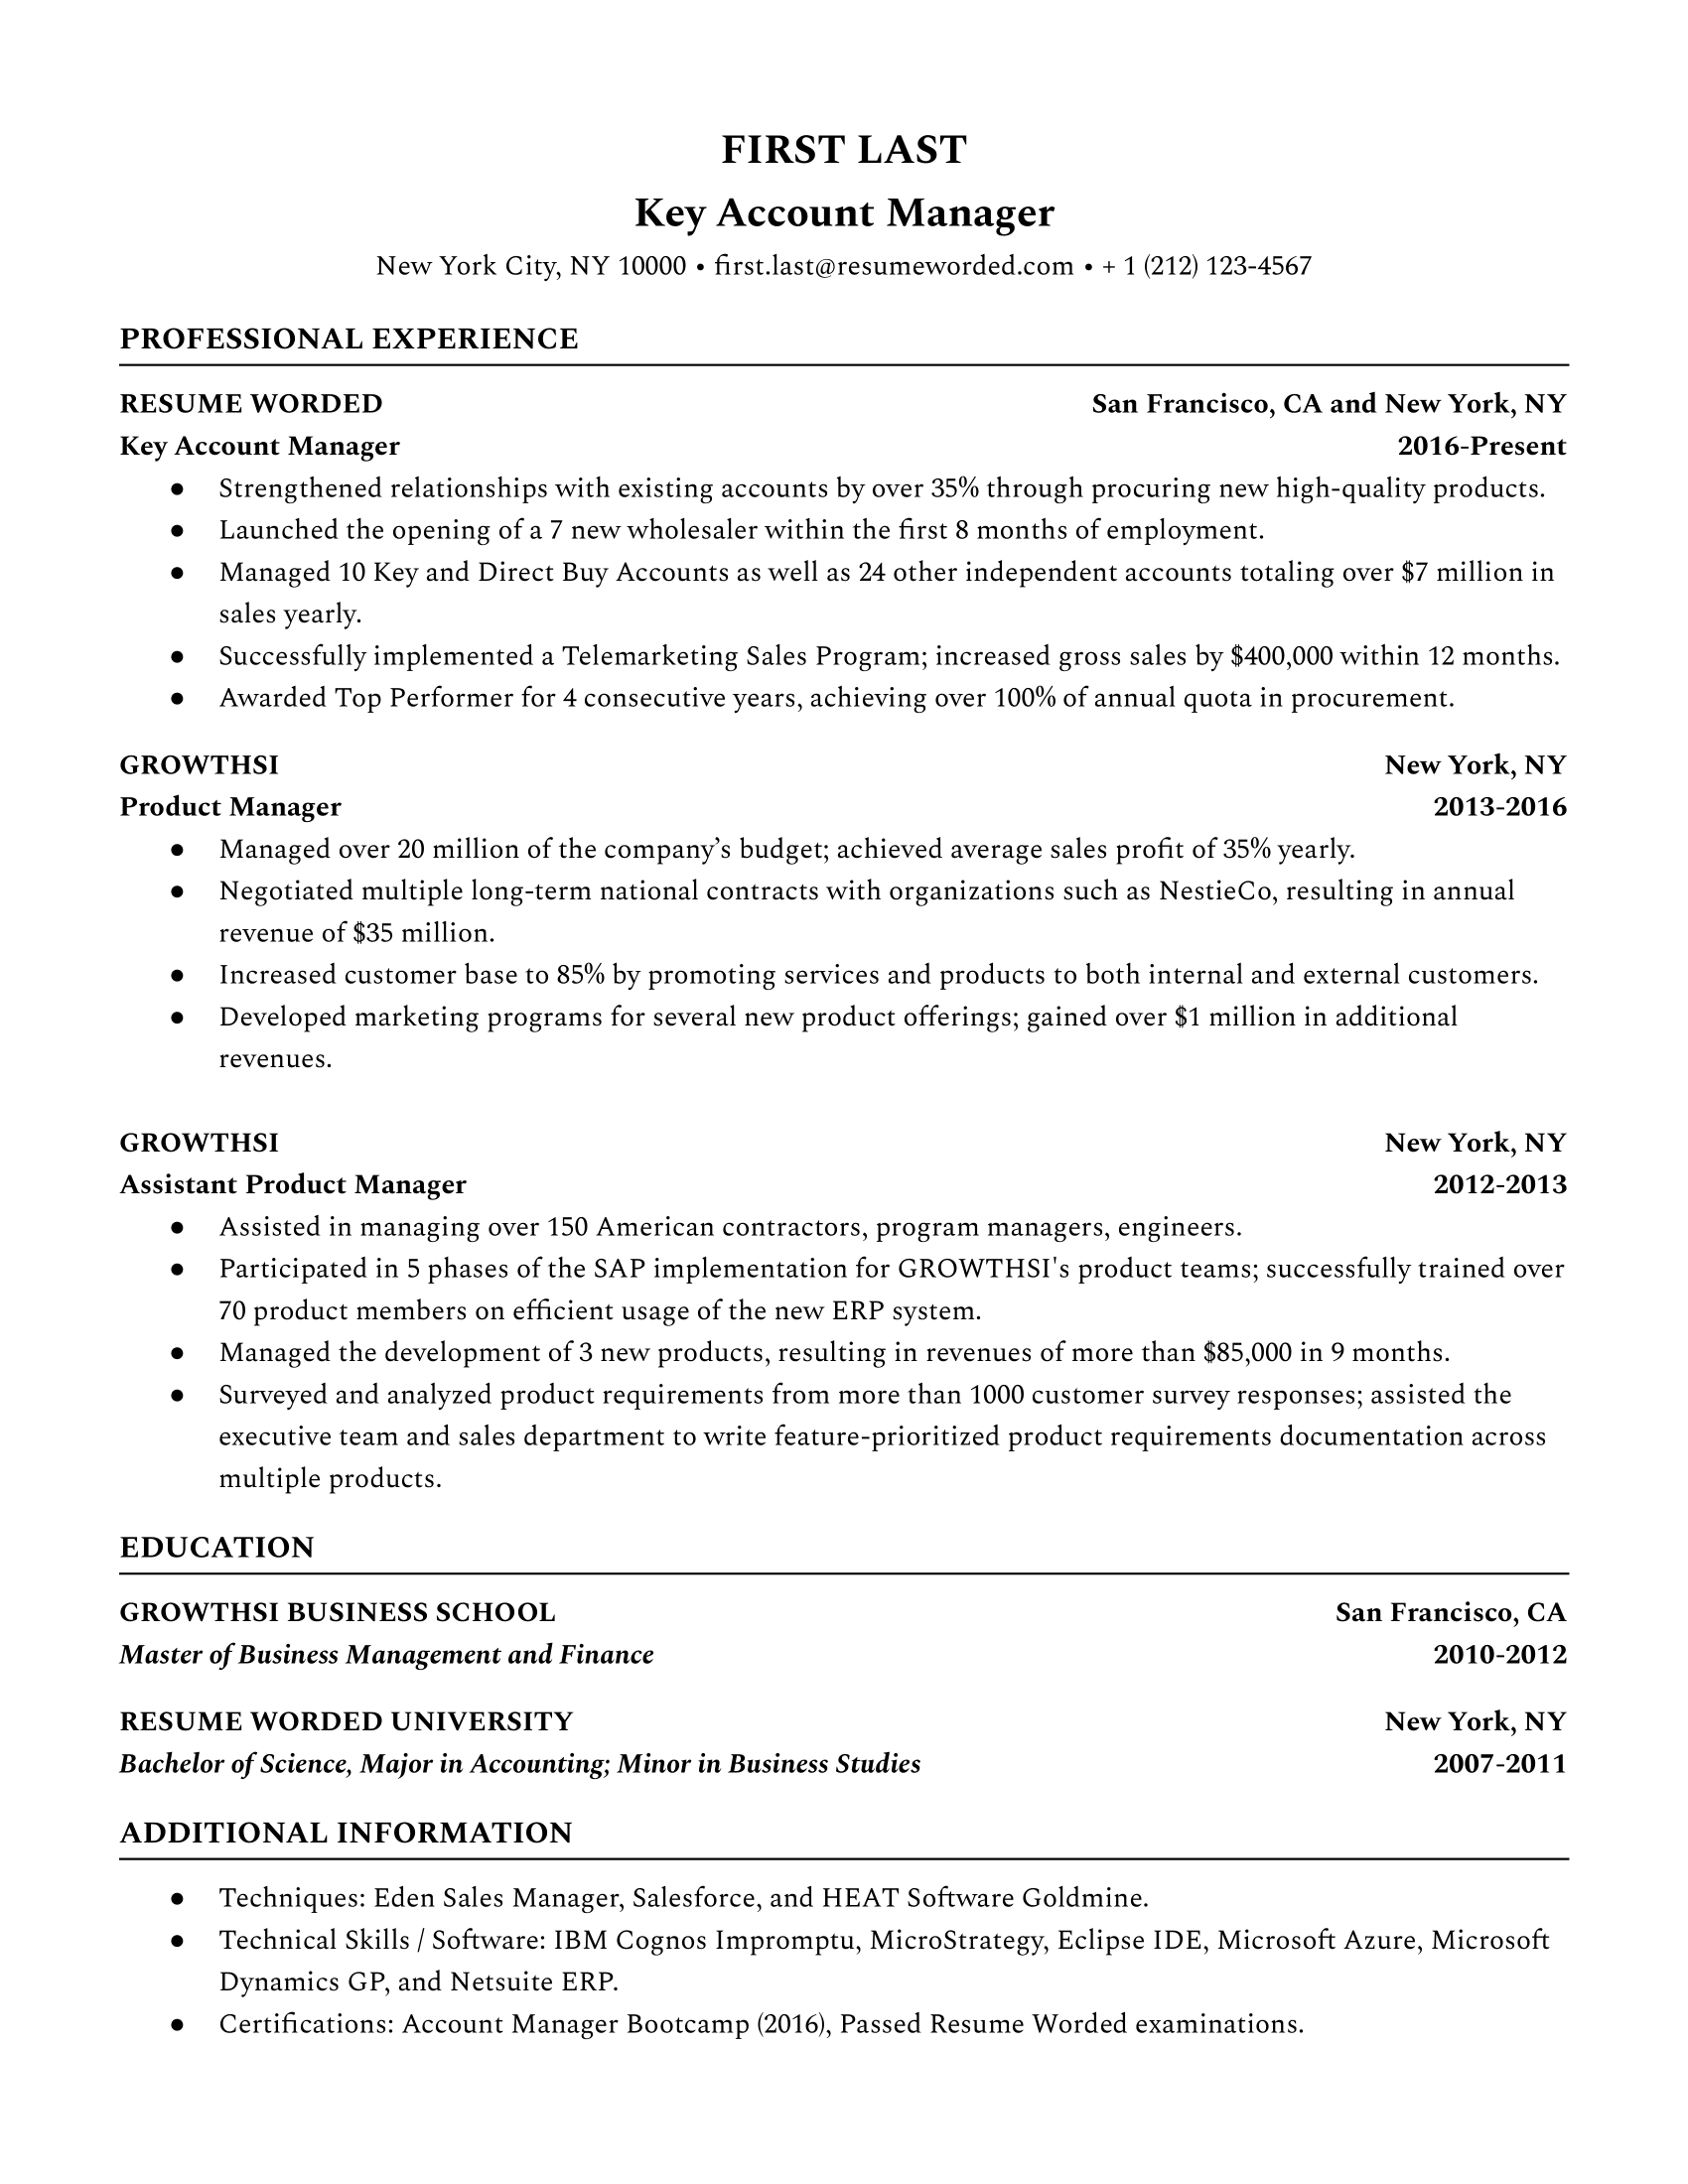 Key Account Manager Resume Template + Example